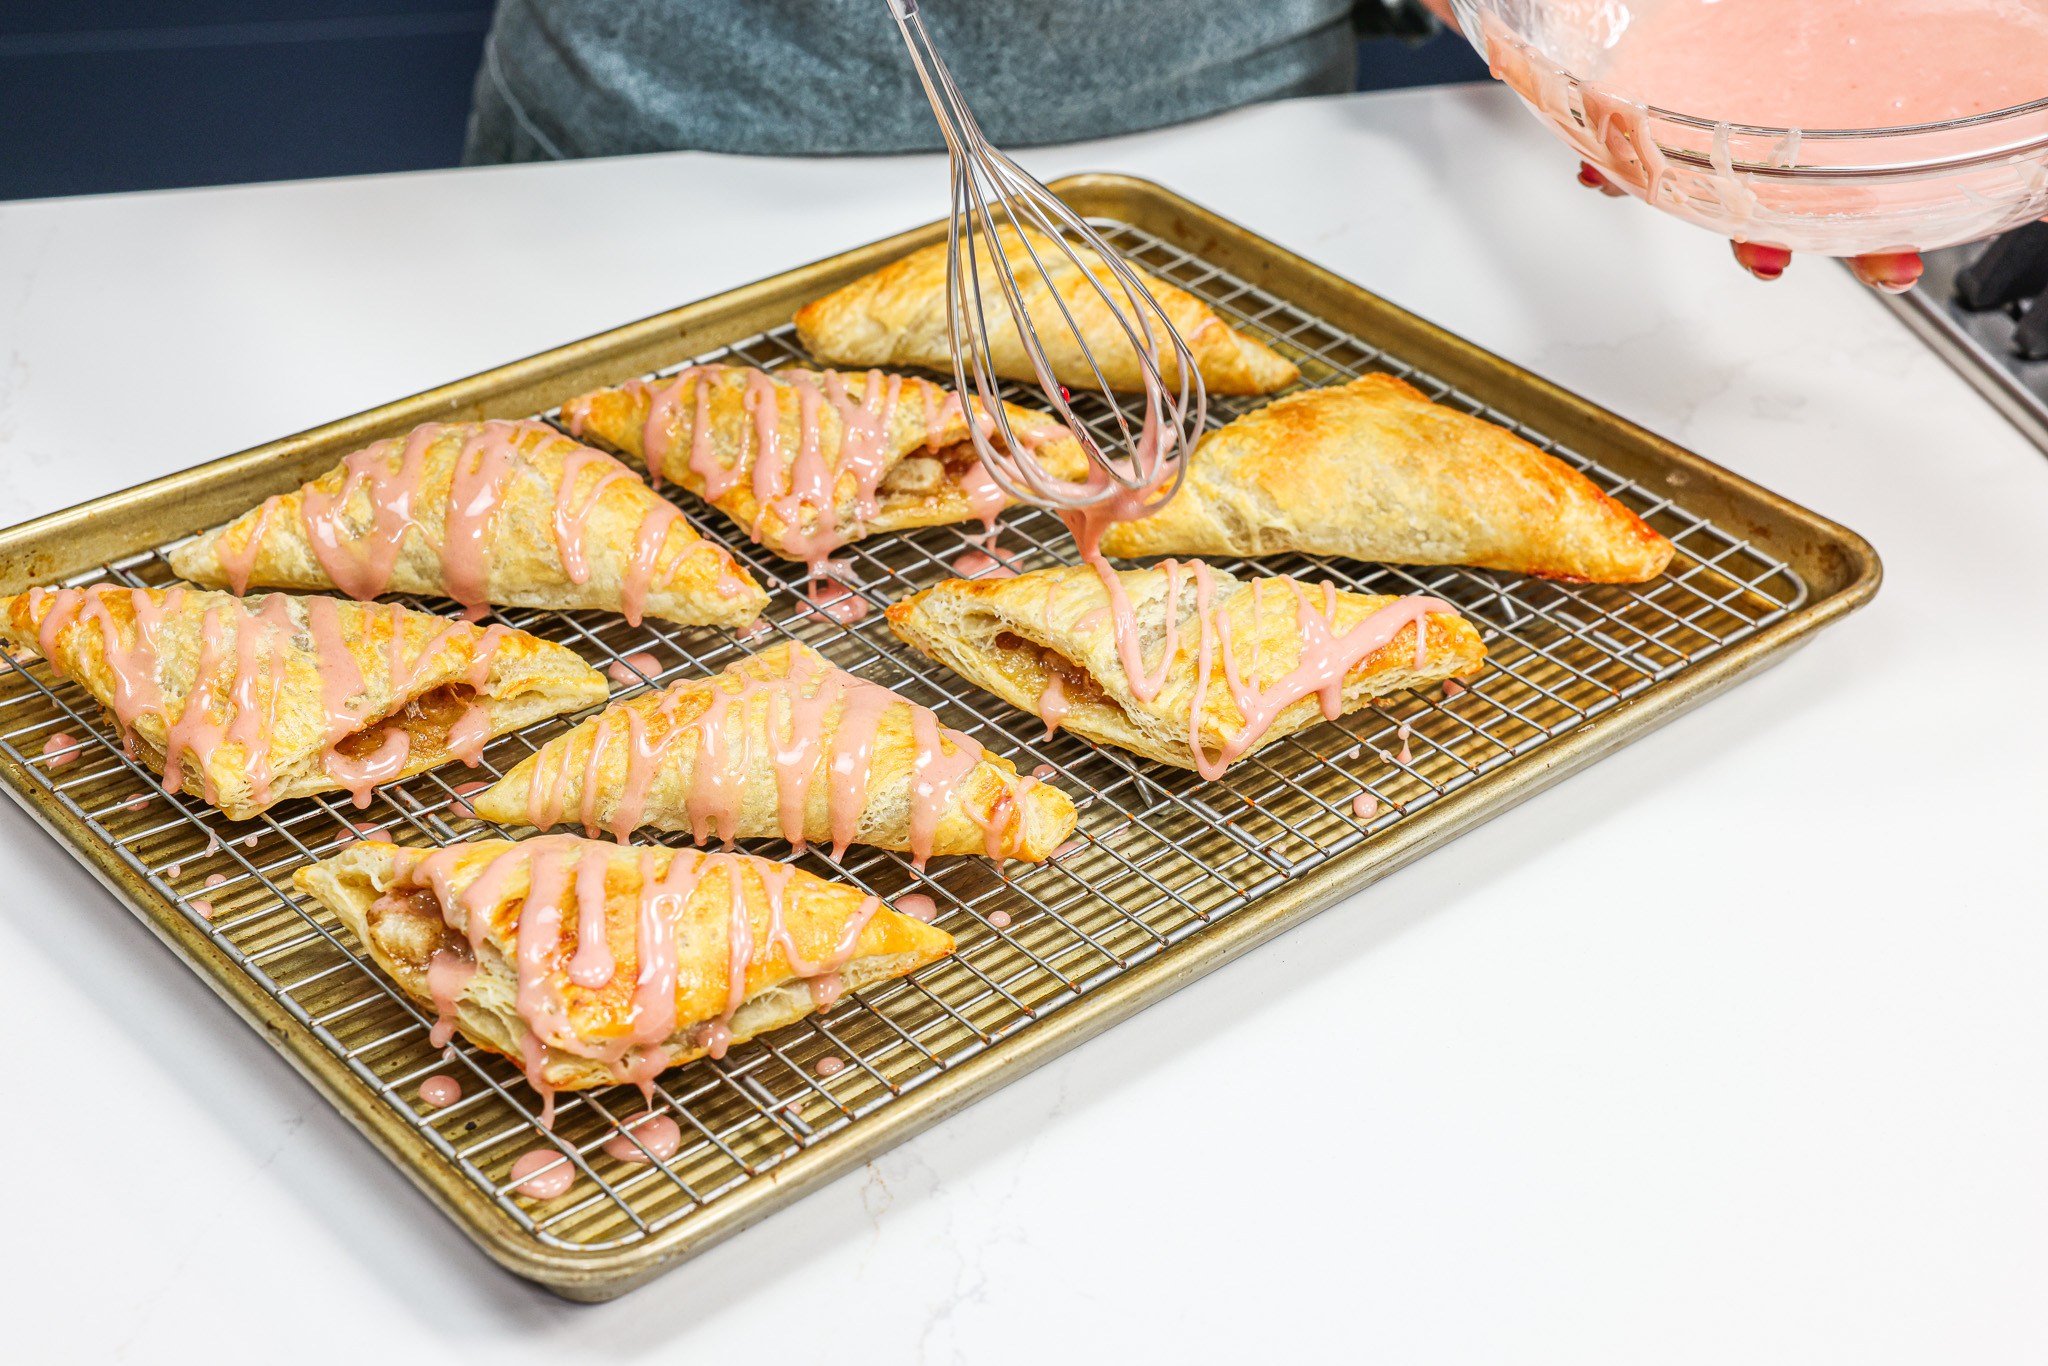 how-to-make-turnovers-345f988c297a1361094c7431